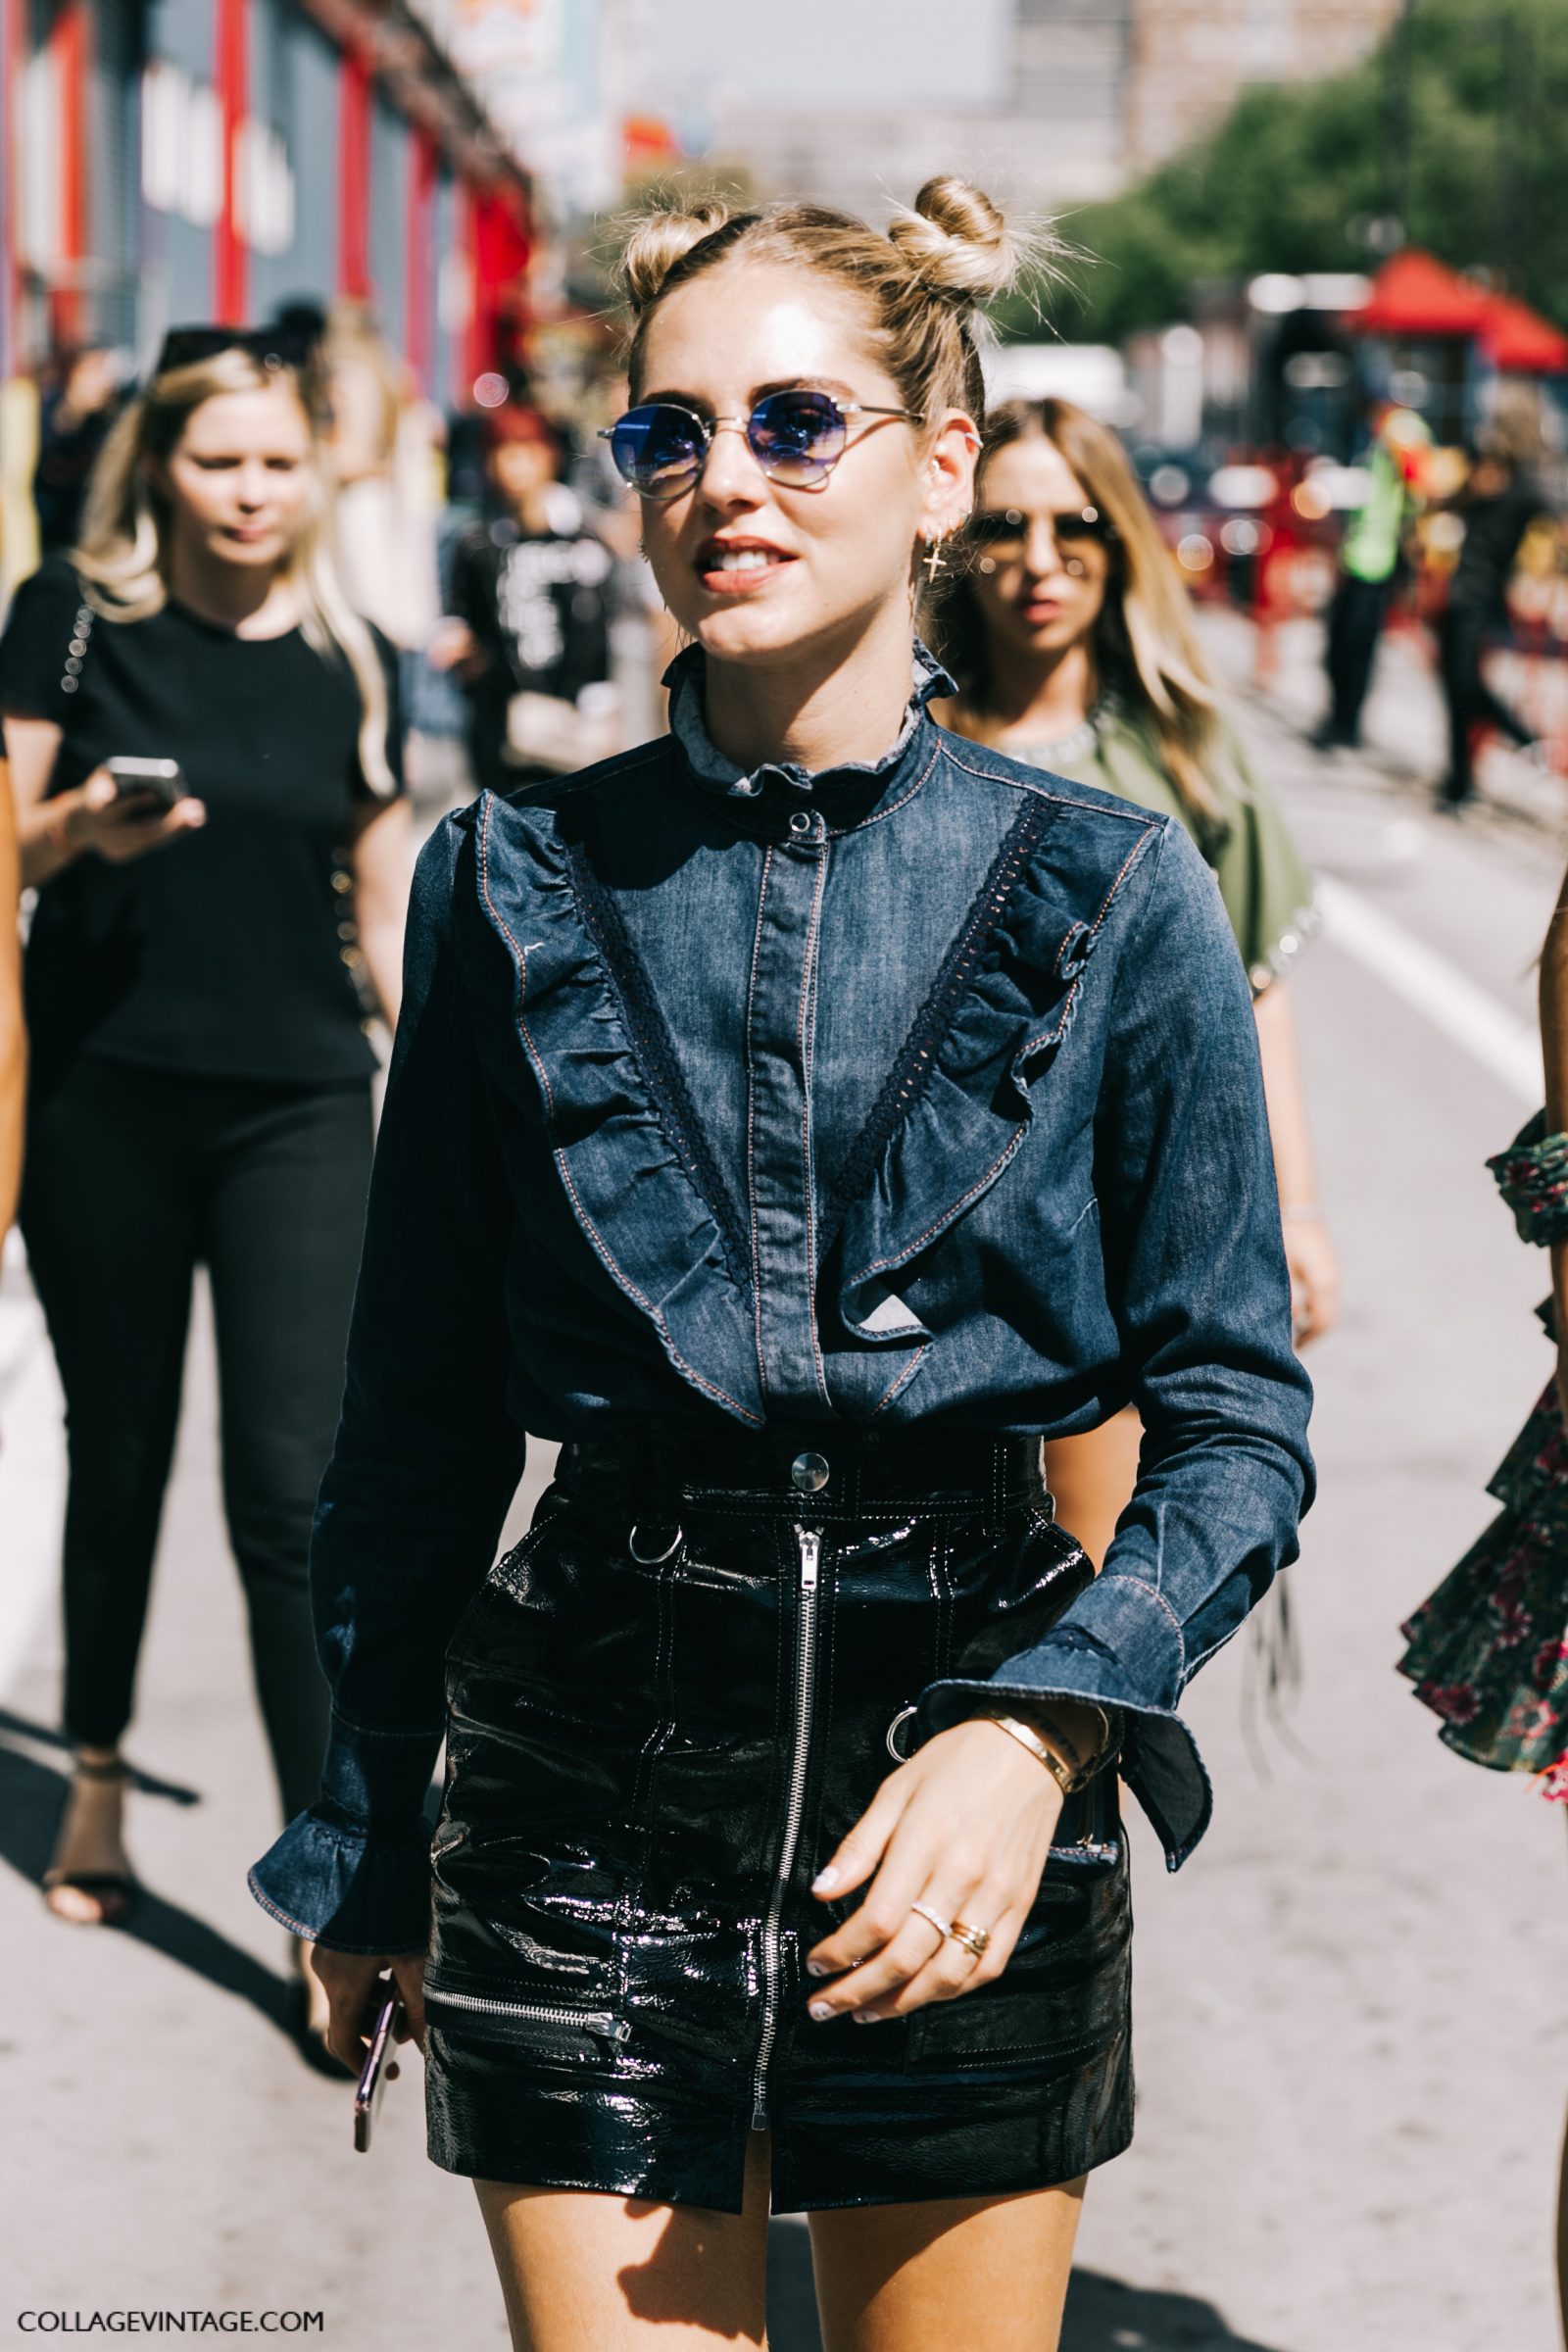 nyfw-new_york_fashion_week_ss17-street_style-outfits-collage_vintage-vintage-del_pozo-michael_kors-hugo_boss-147